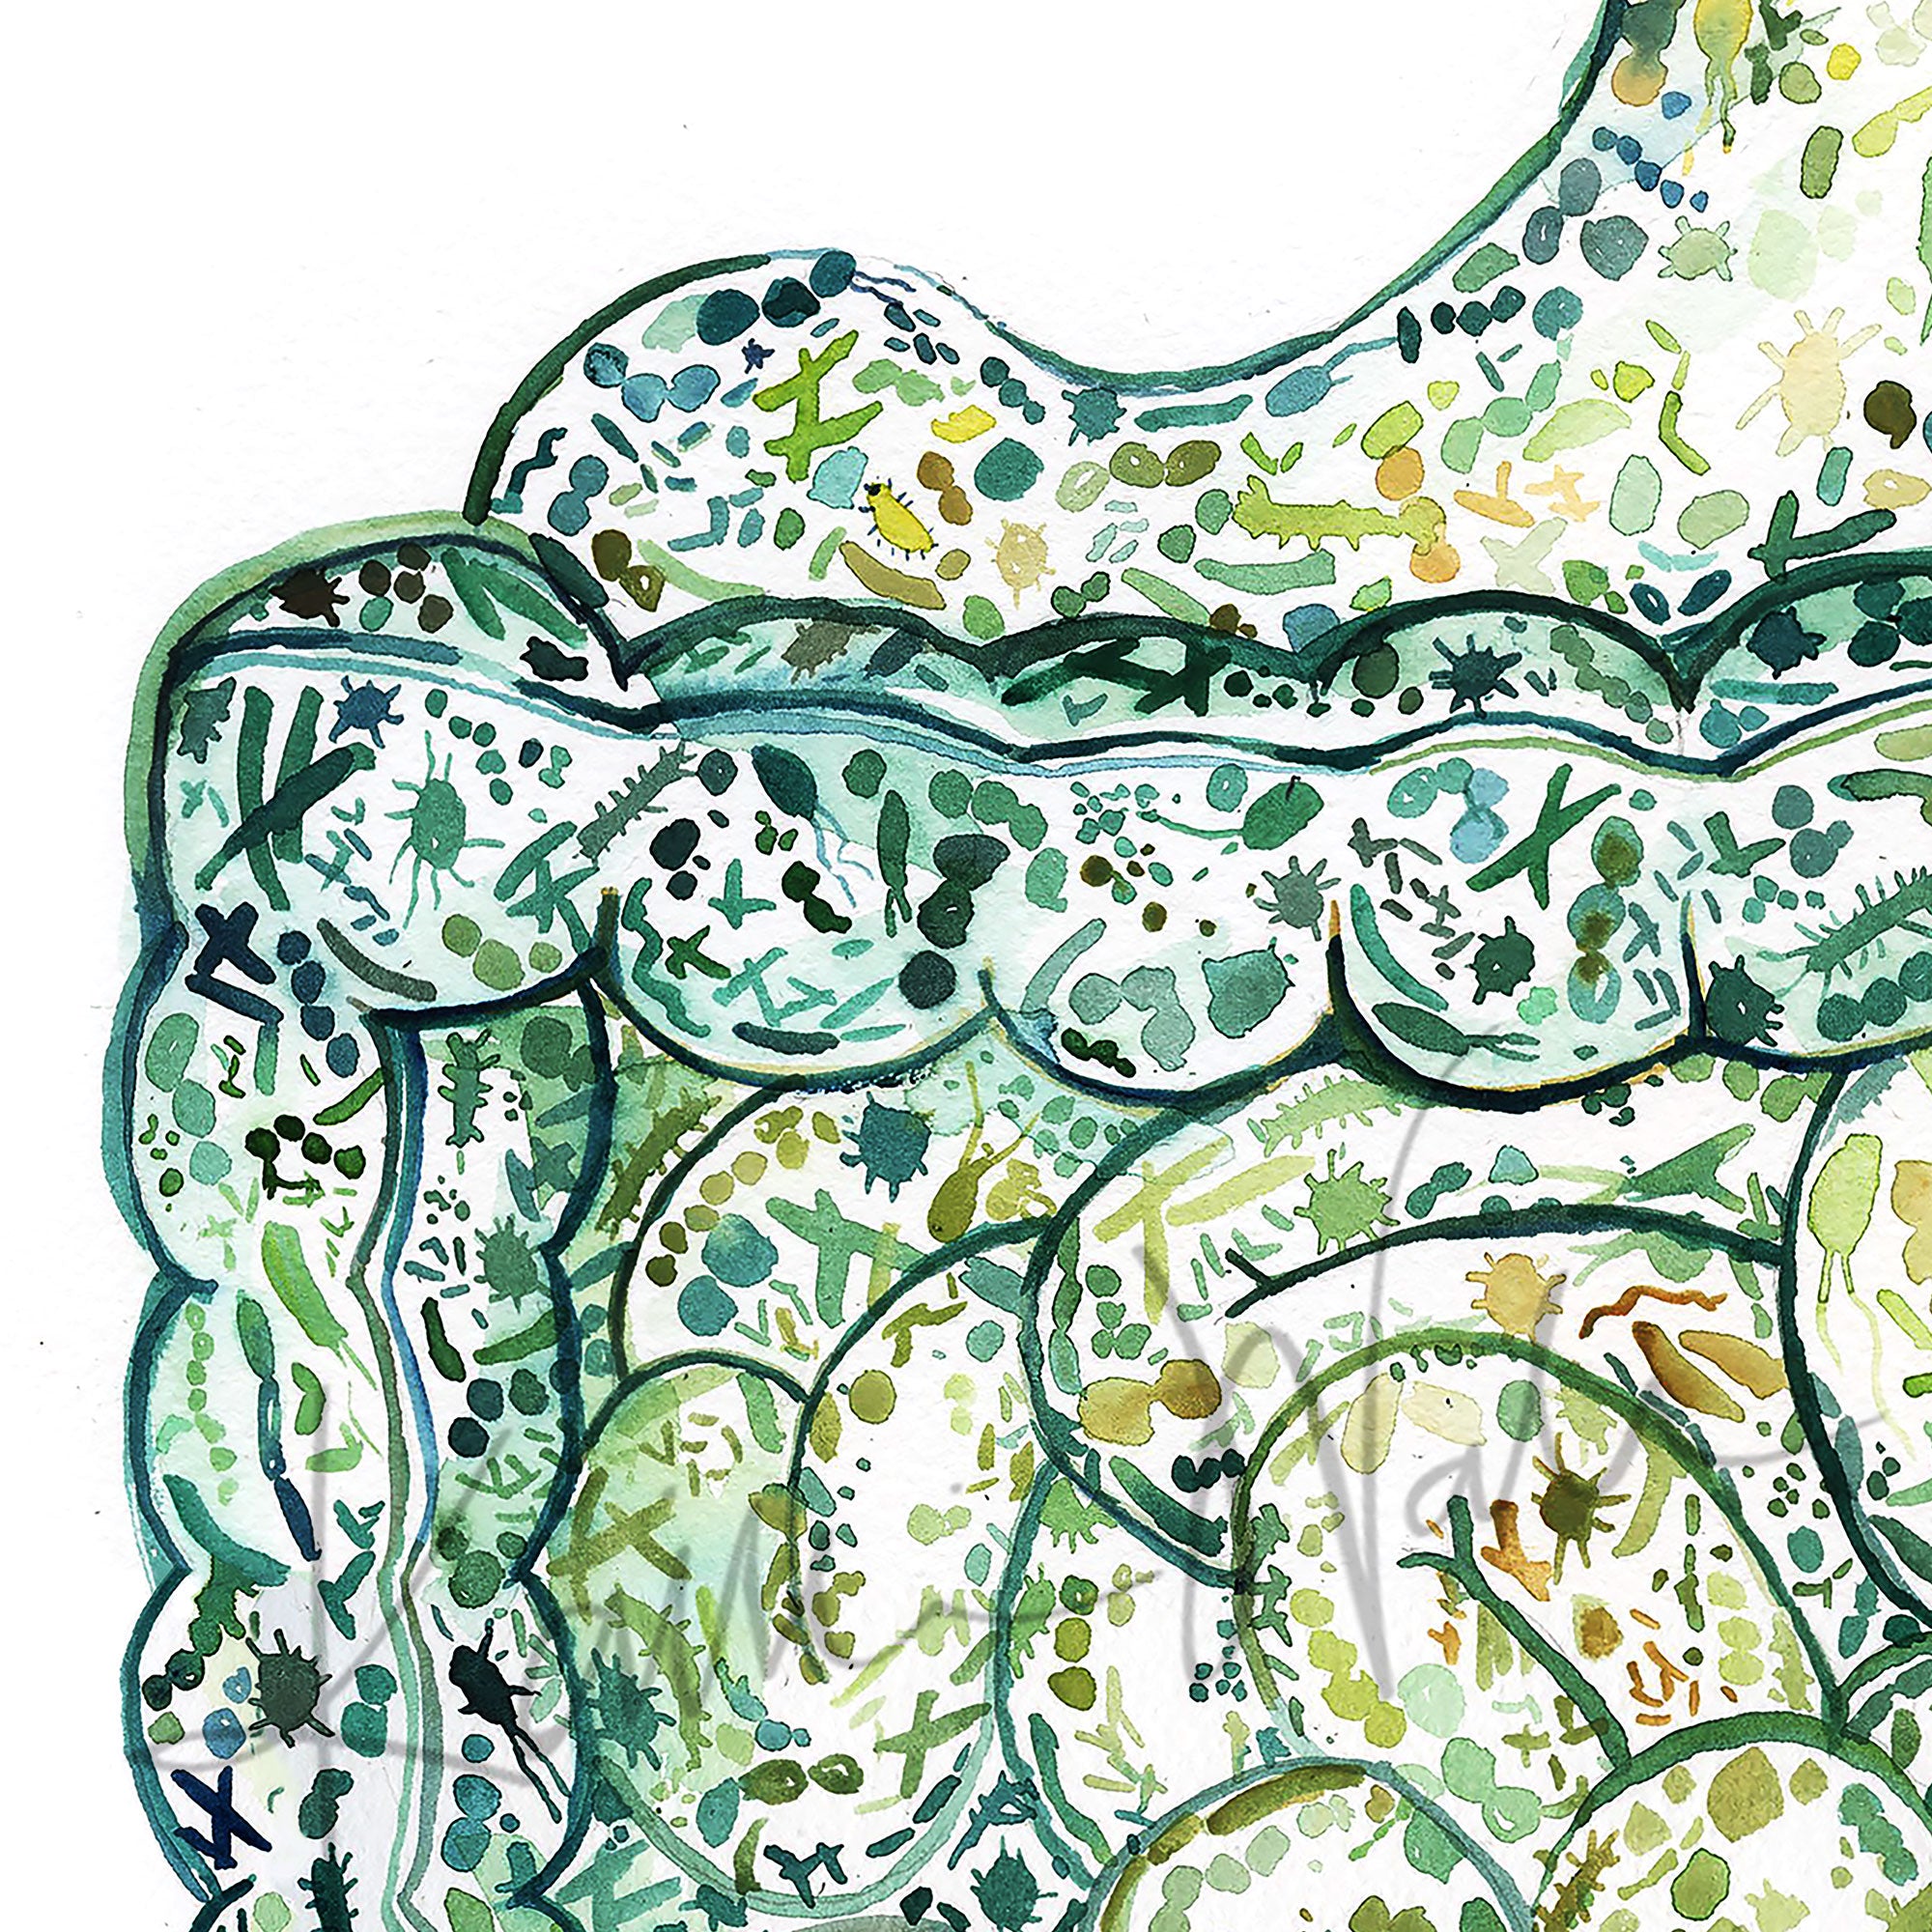 Zoomed in view of a watercolor painting of the stomach and intestines showing the internal gut microbiome.